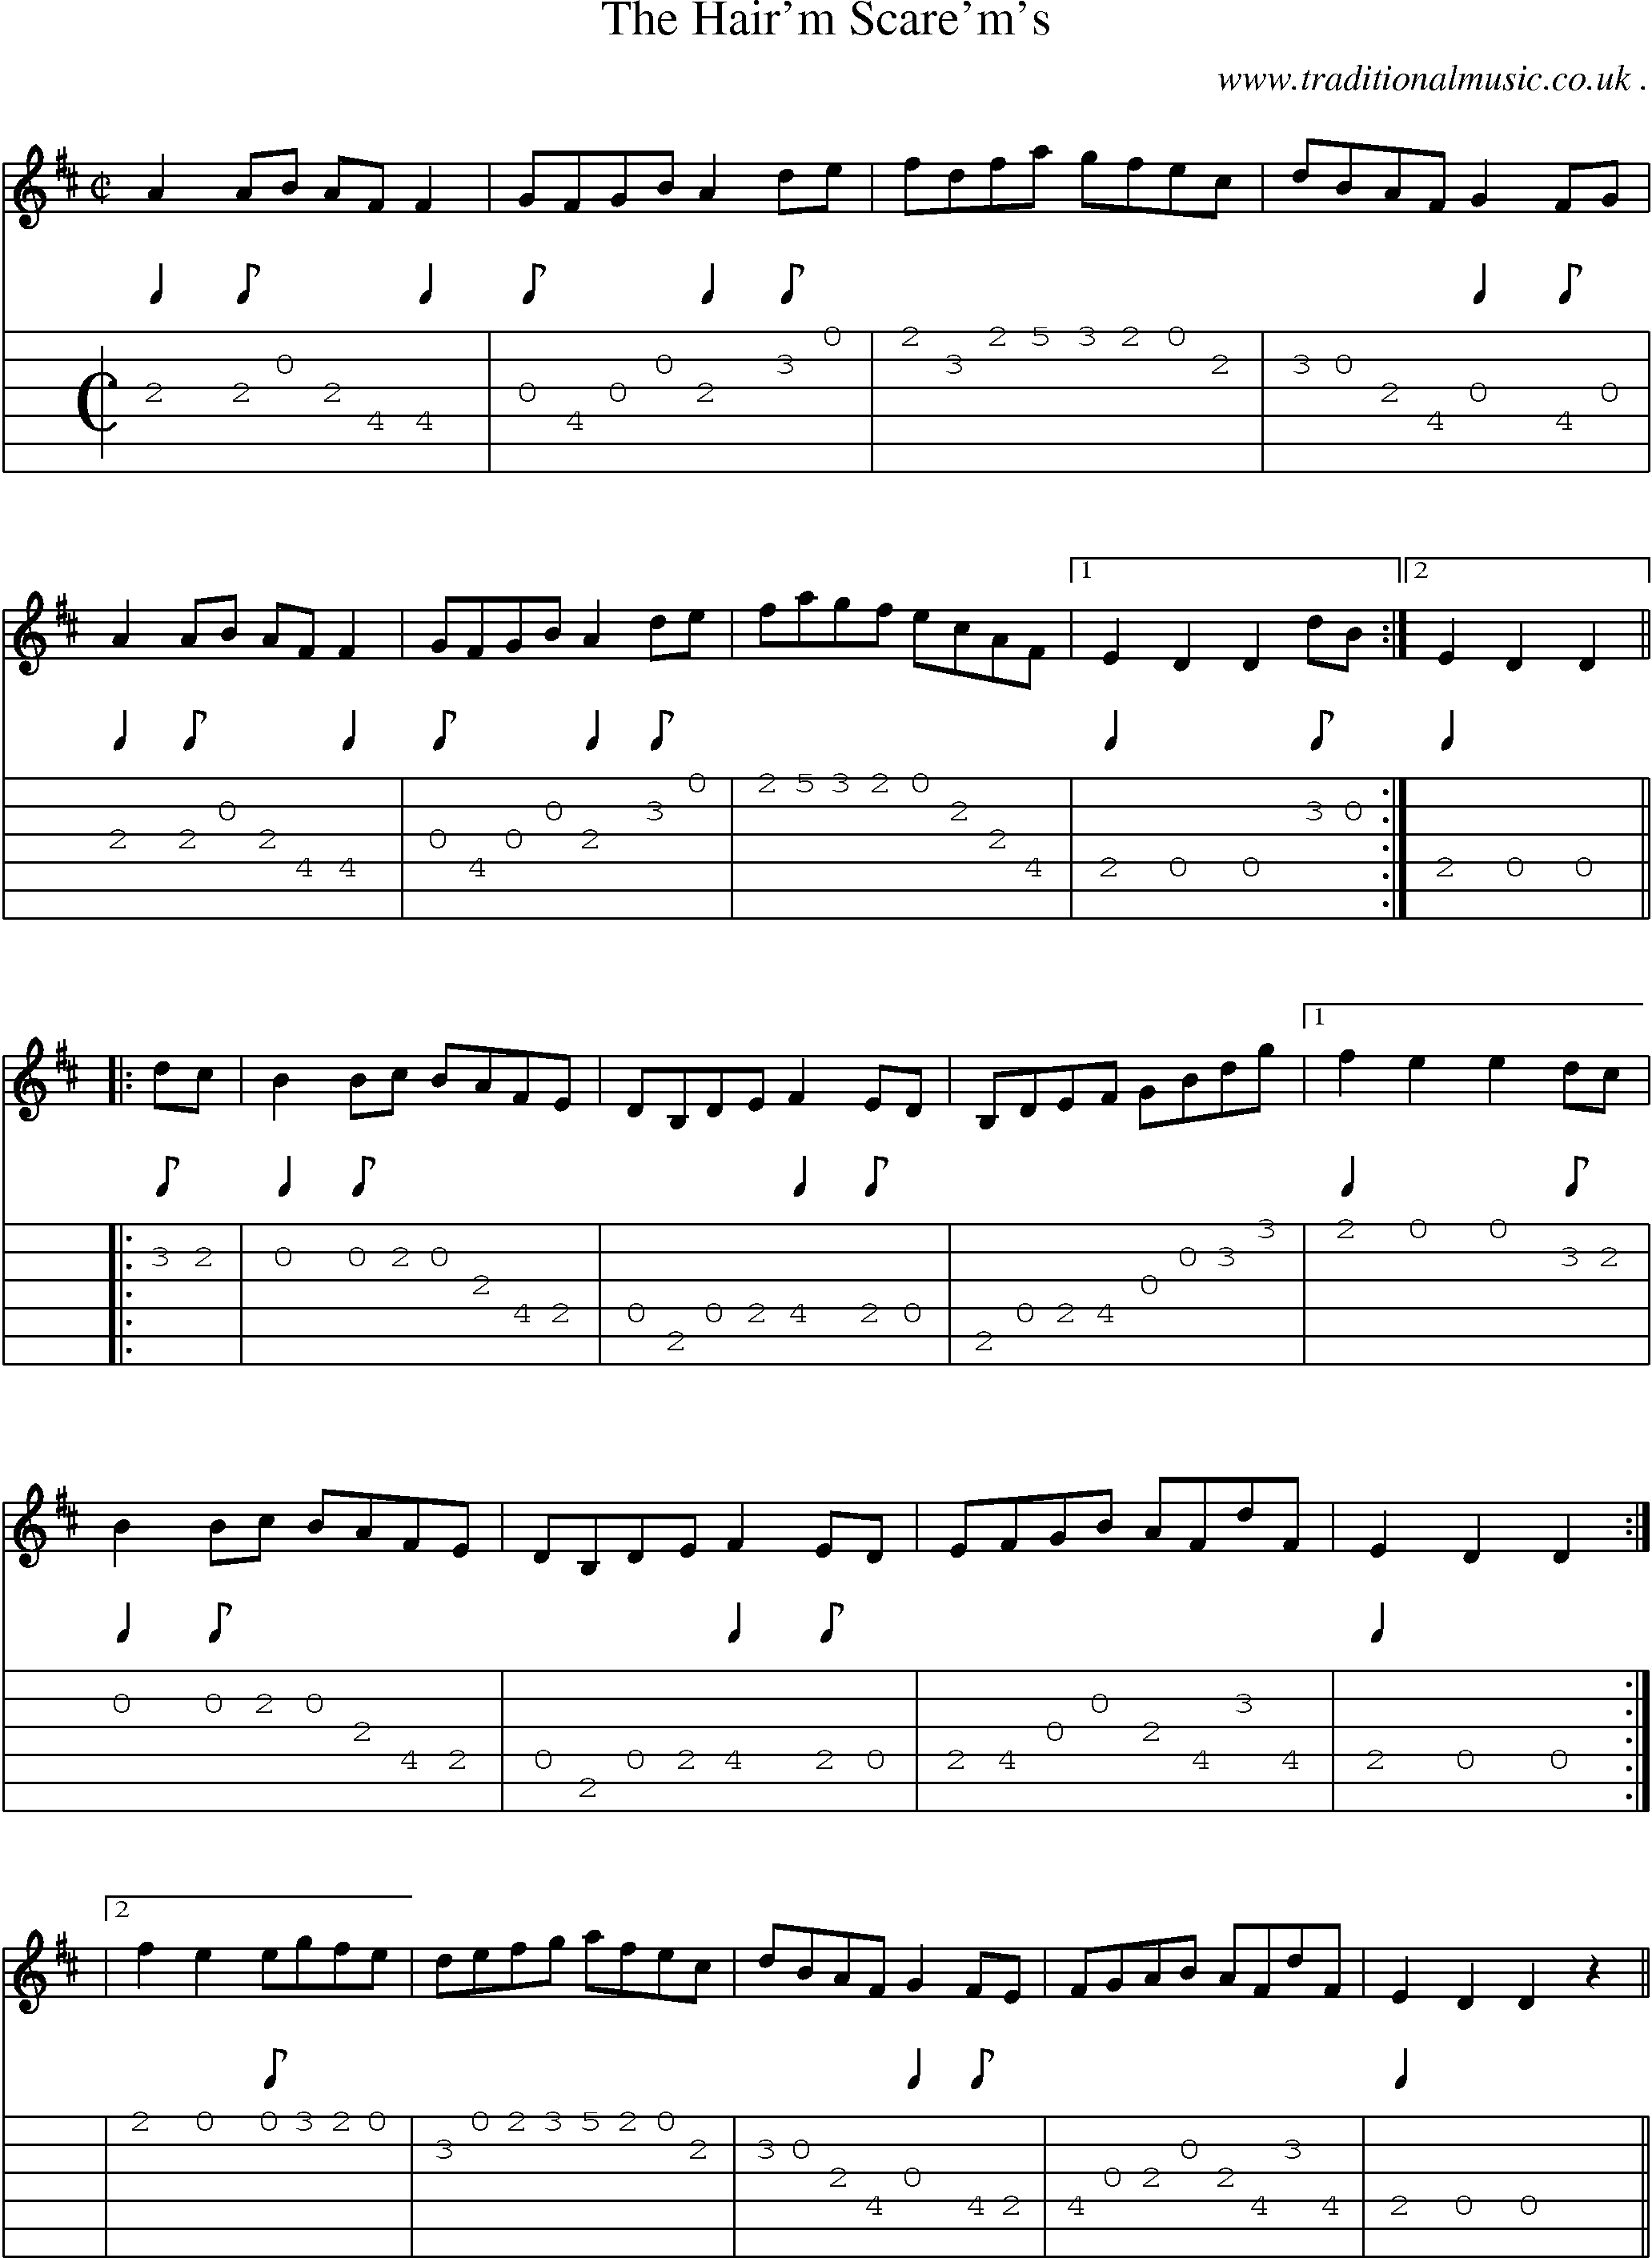 Sheet-Music and Guitar Tabs for The Hairm Scarems